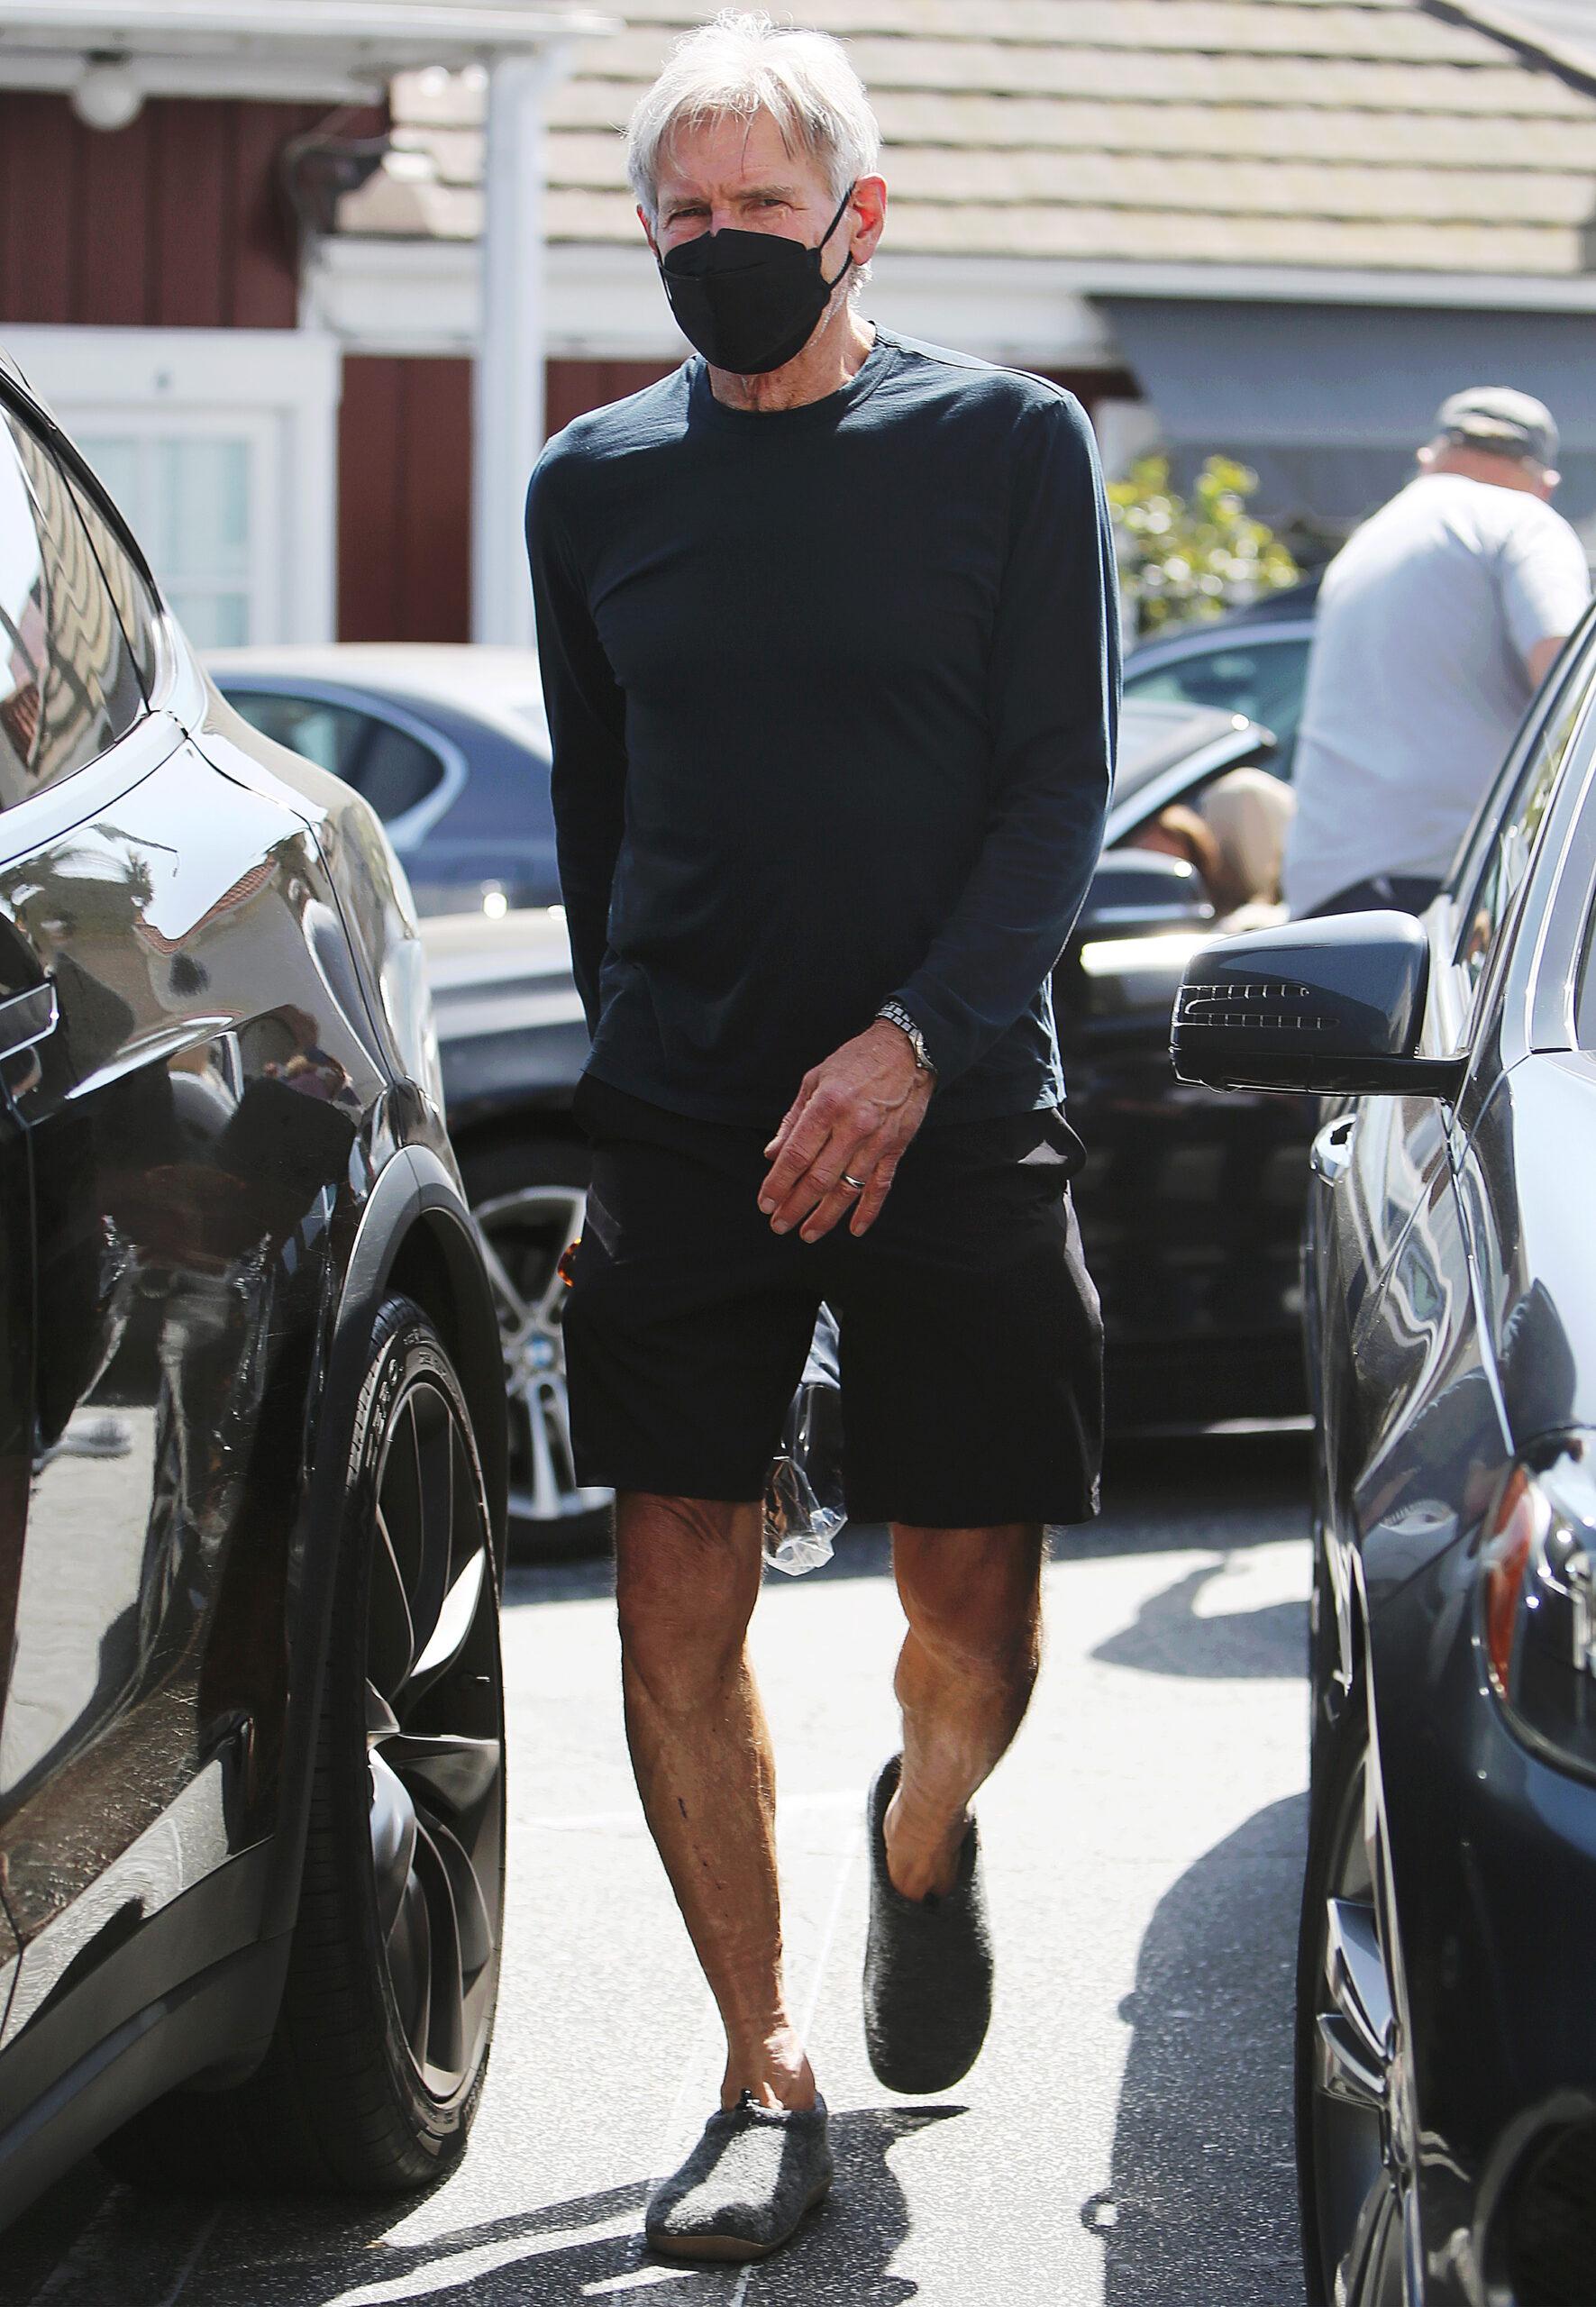 Actor Harrison Ford running errands in confortable loafers at the Brentwood Country Mart in Los Angeles